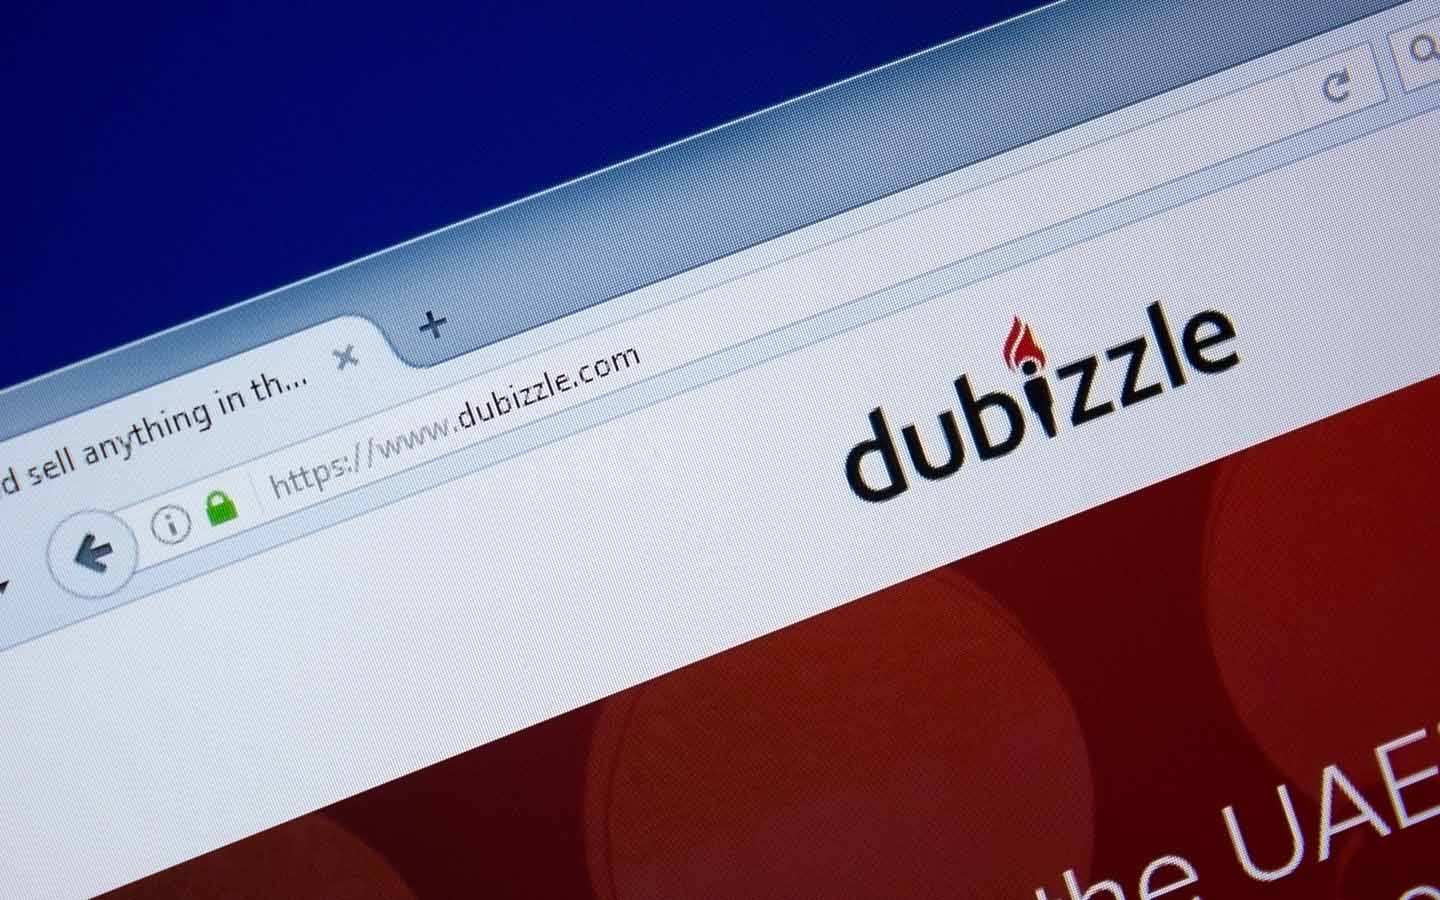 dubizzle is an authentic platform for buying and selling used cars